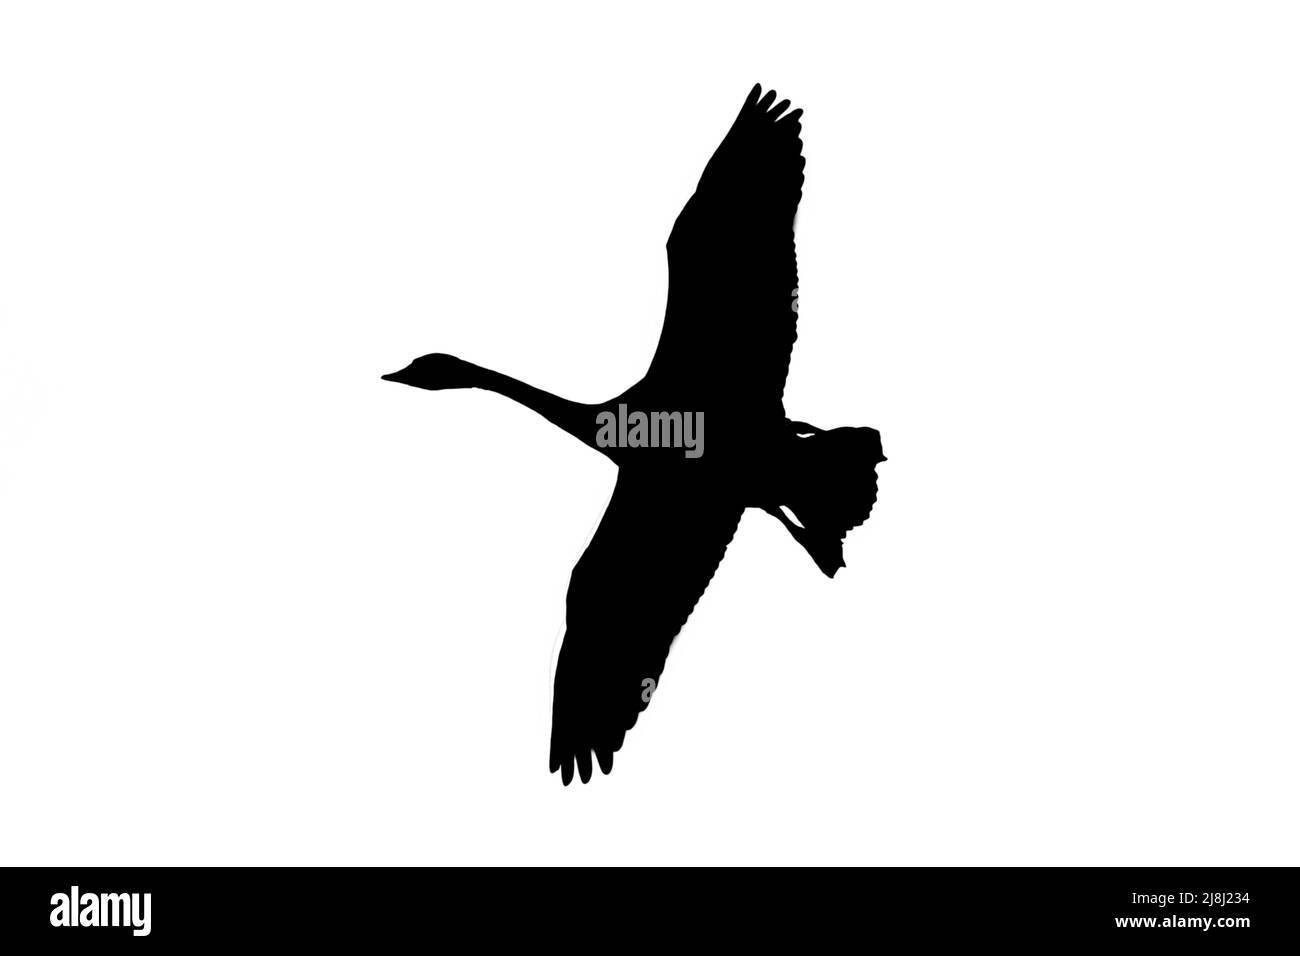 Silhouette of tundra swan / Bewick's swan (Cygnus bewickii) in flight outlined against white background to show wings, head and tail shapes Stock Photo